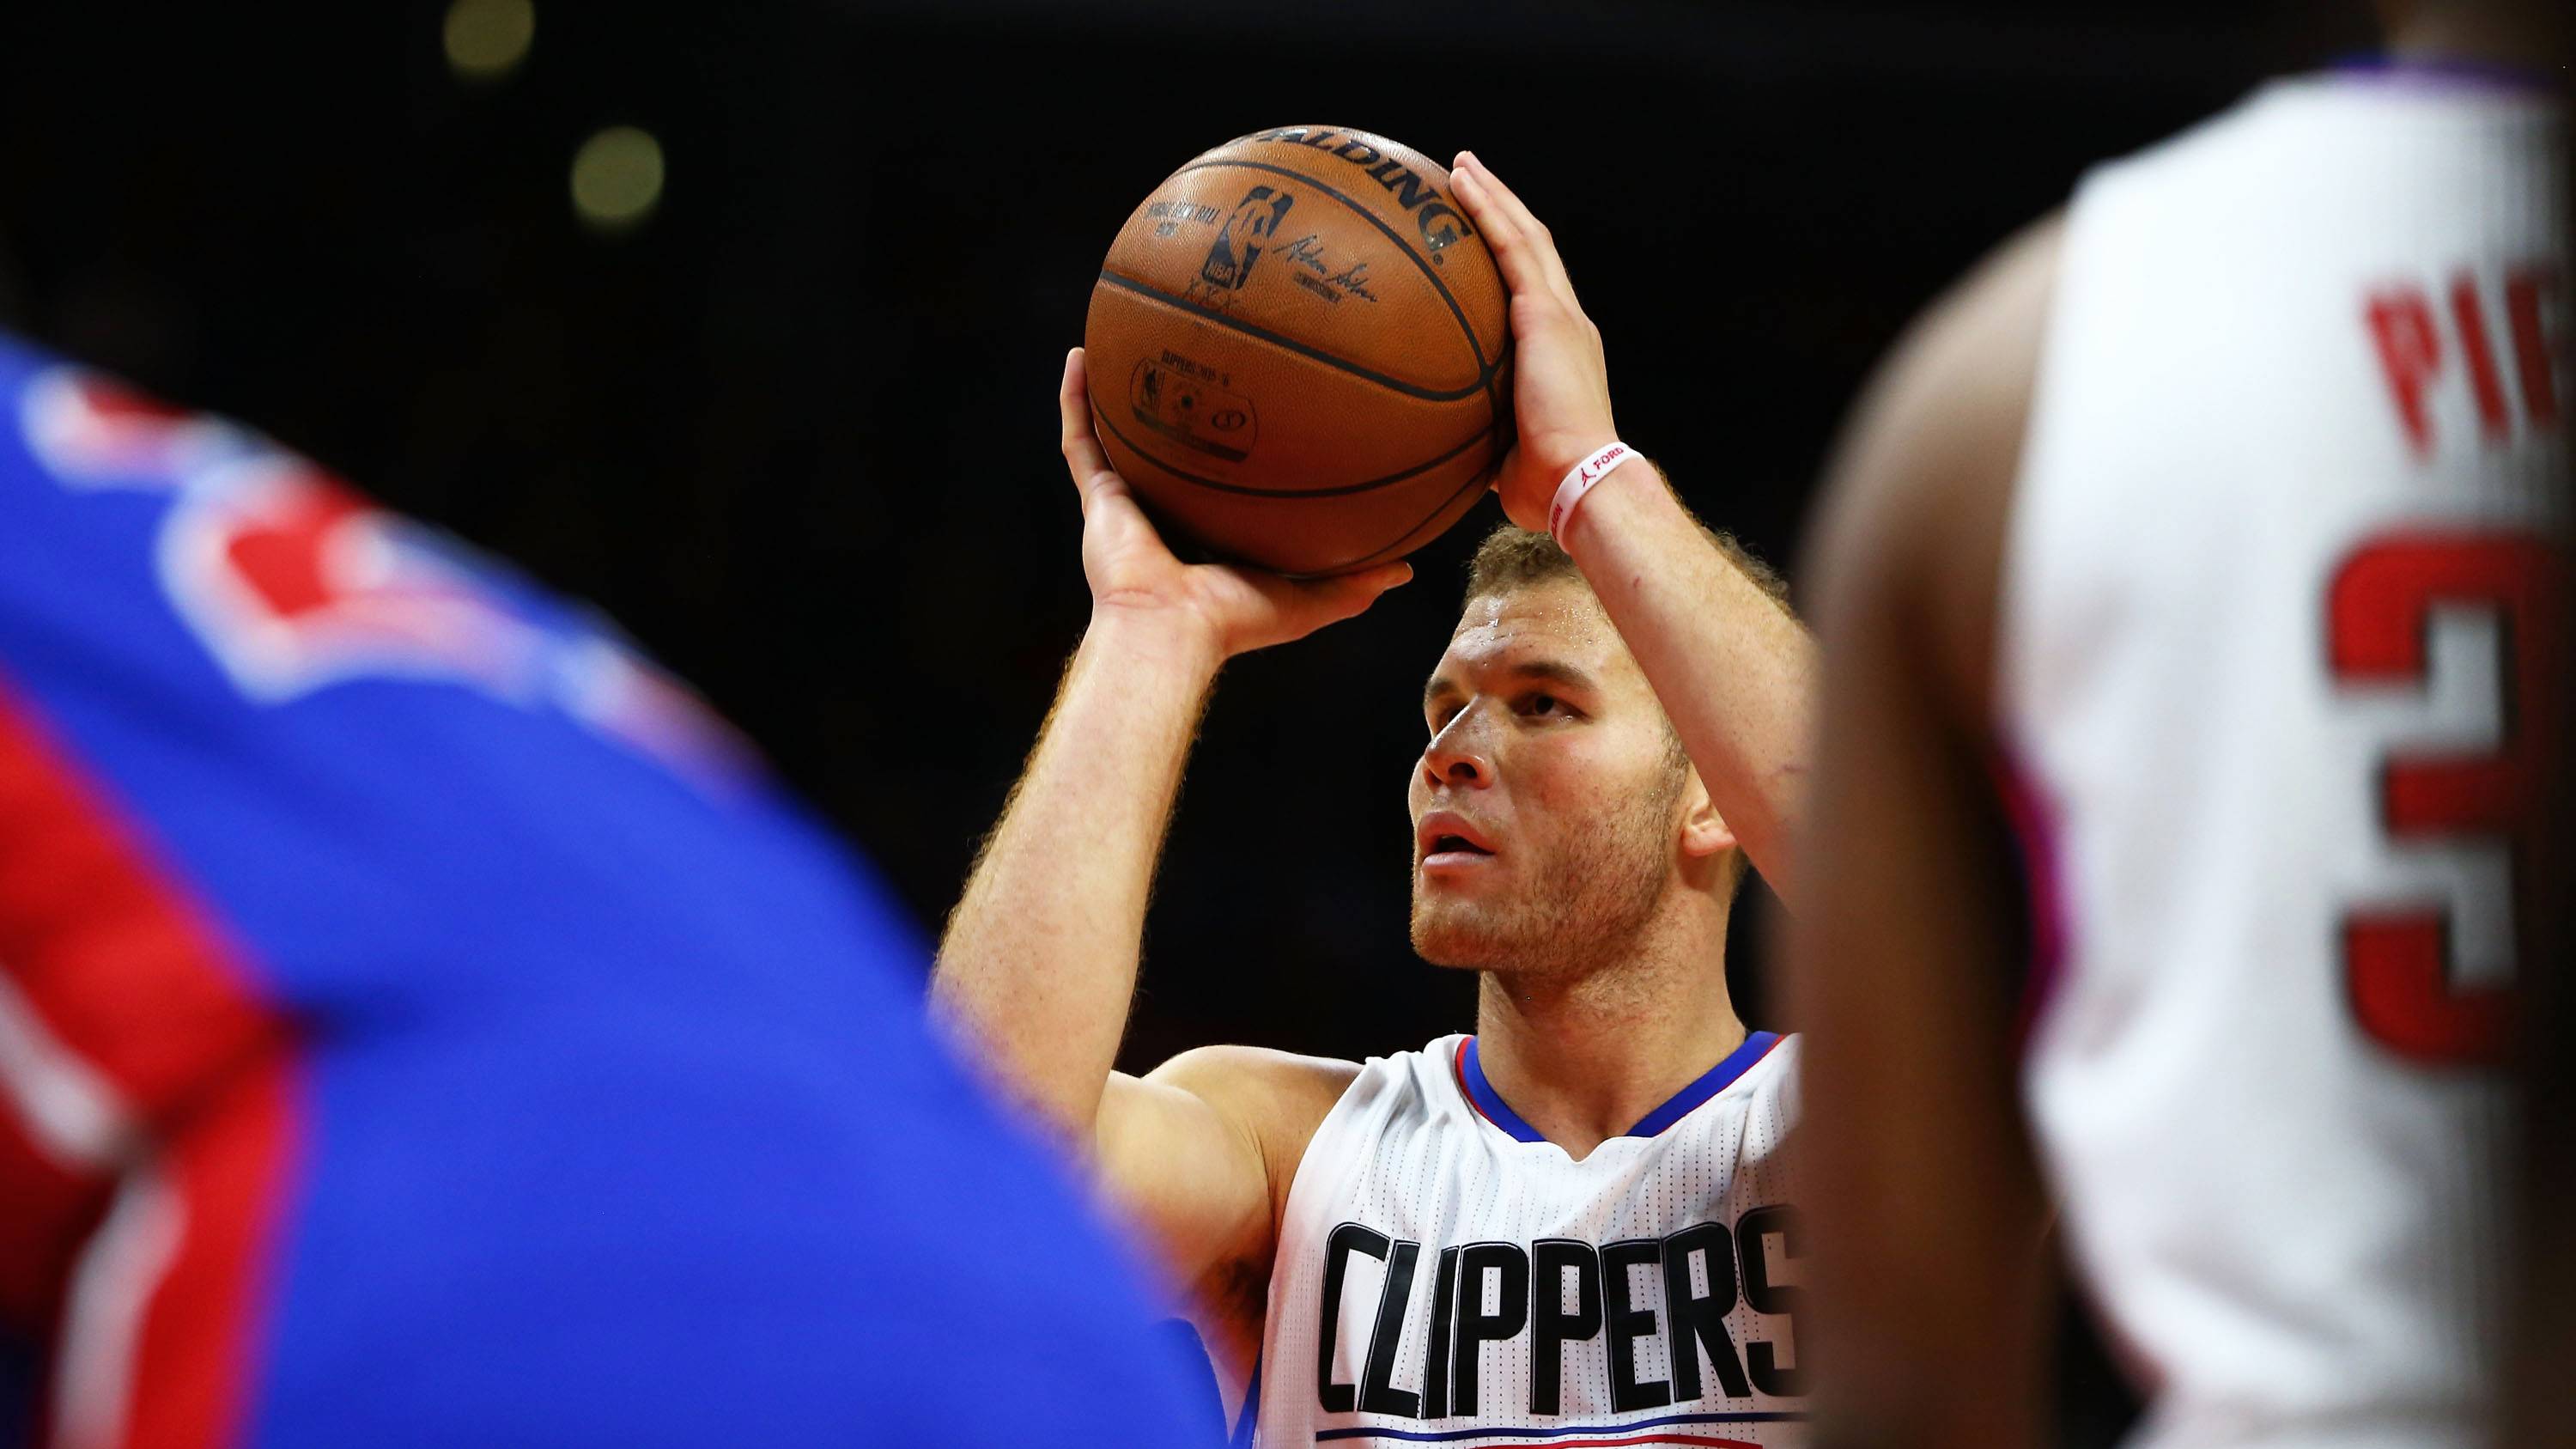 LOS ANGELES, CA - NOVEMBER 14:  Blake Griffin #32 of the Los Angeles Clippers shoots a free-throw in the second half of the NBA game against the Detroit Pistons at Staples Center on November 14, 2015 in Los Angeles, California. The Clippers defeated the Pistons 101-96. NOTE TO USER: User expressly acknowledges and agrees that, by downloading and or using this photograph, User is consenting to the terms and conditions of the Getty Images License Agreement.   (Photo by Victor Decolongon/Getty Images)